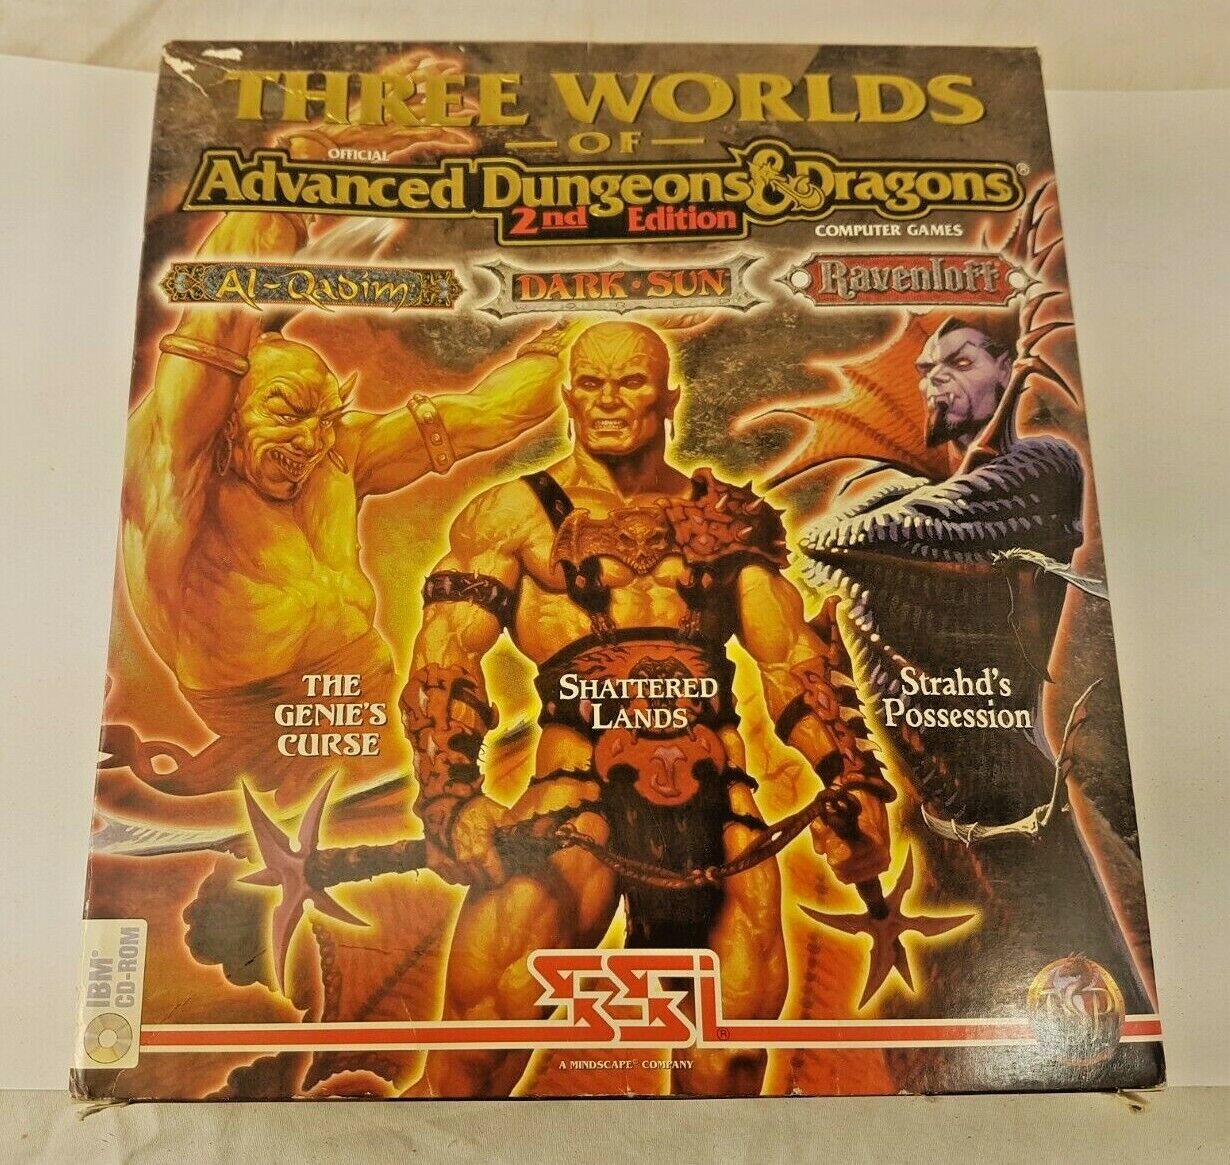 Three Worlds of Advanced Dungeons & Dragons 2nd Edition (PC 1995) CD-ROM SSI